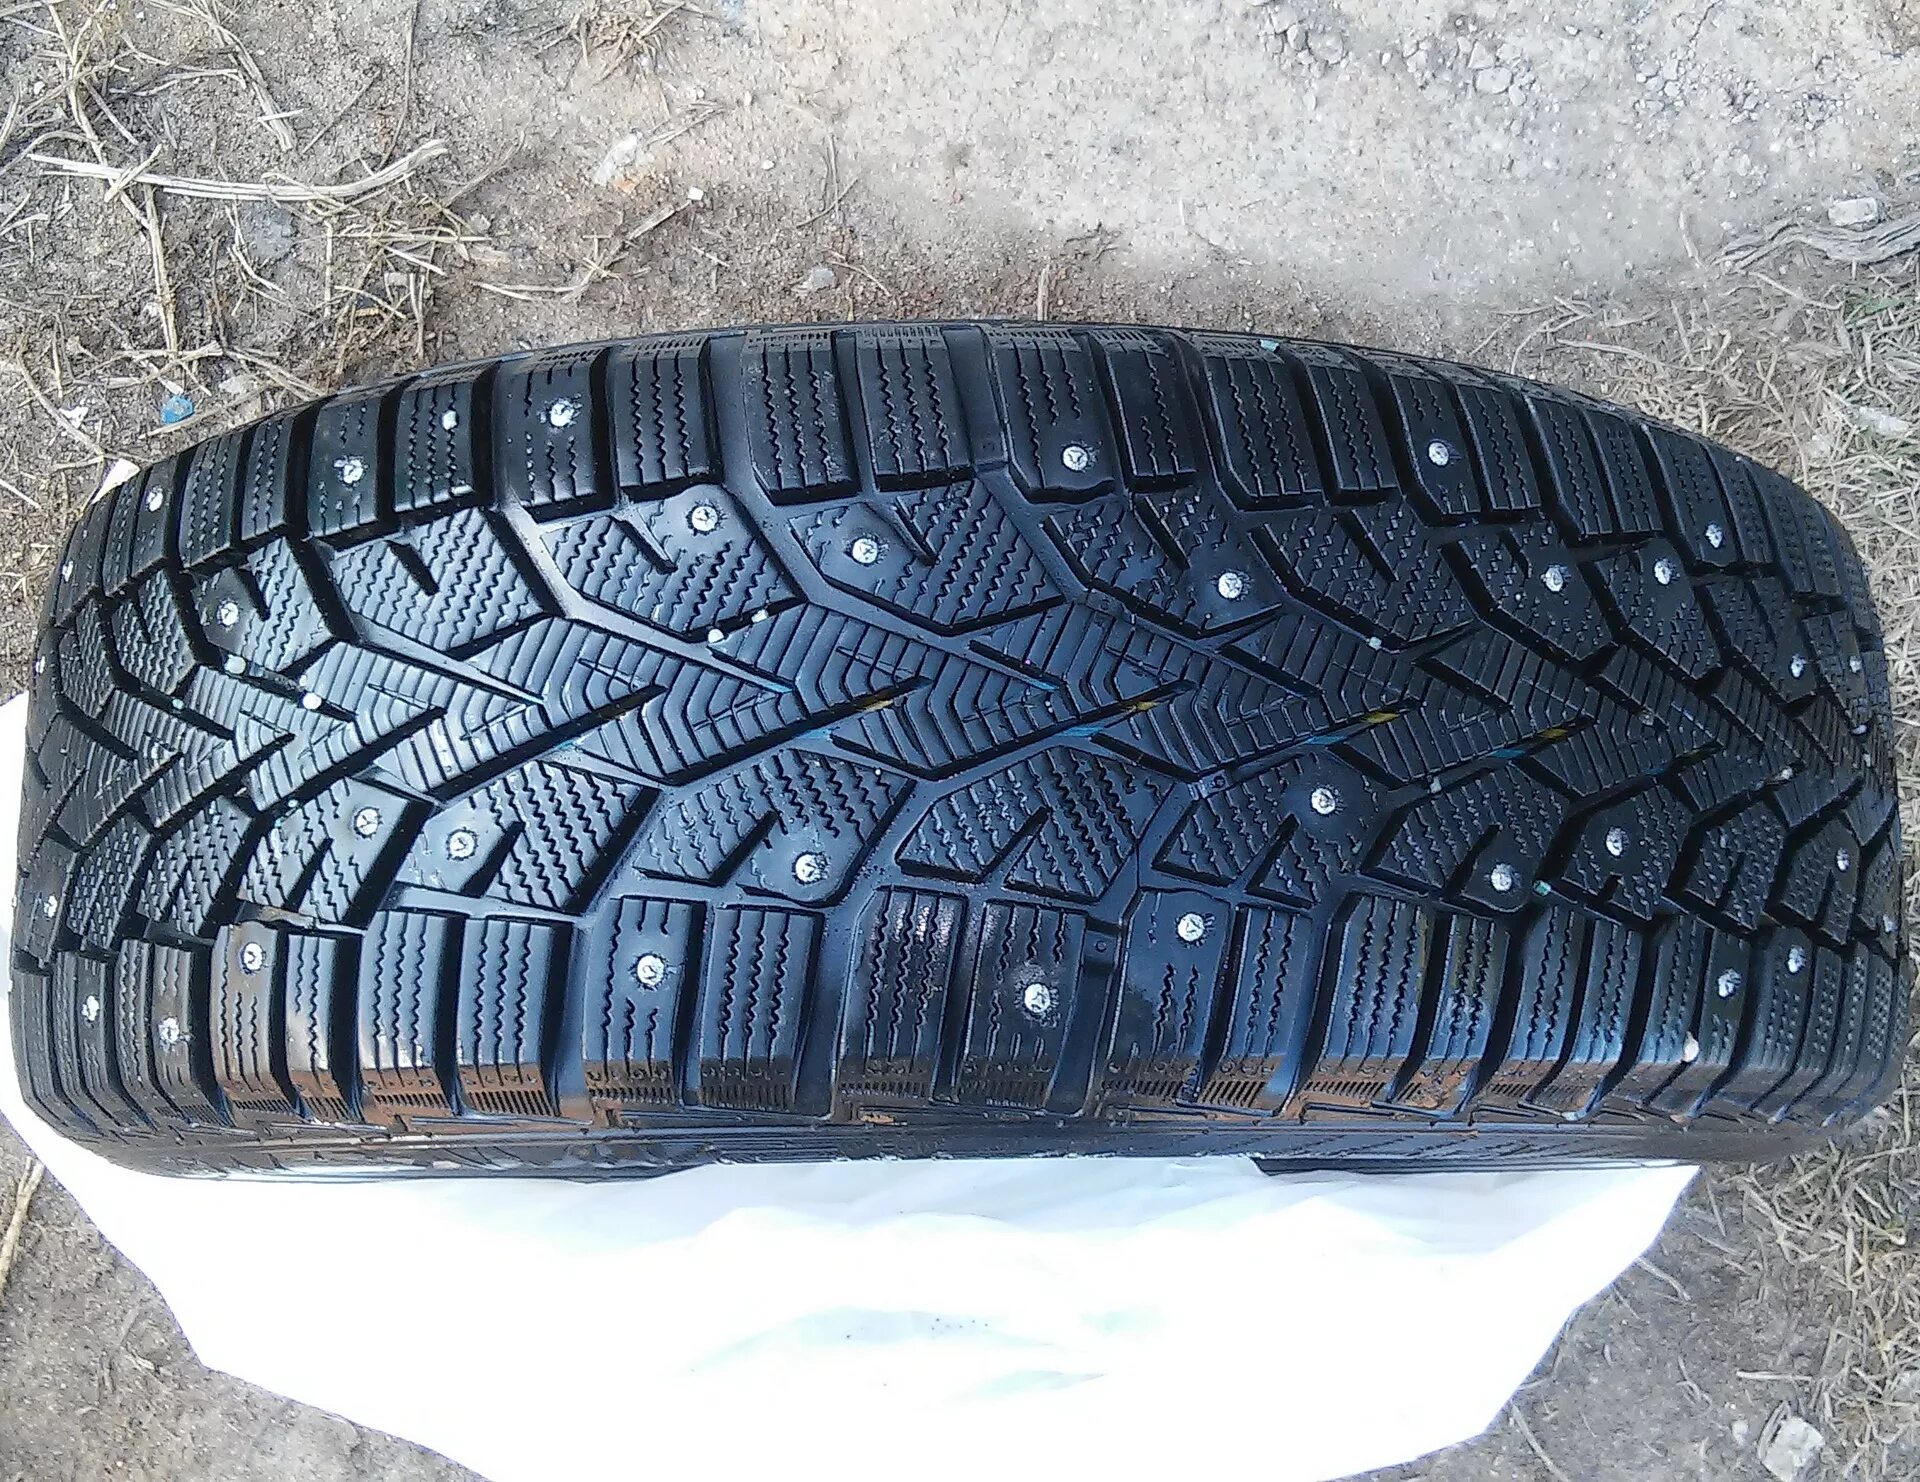 Gislaved Nord Frost 100. Гиславед Норд Фрост 100 205/55 r16. Gislaved Nord Frost 2. Гиславед r 15 55 195.